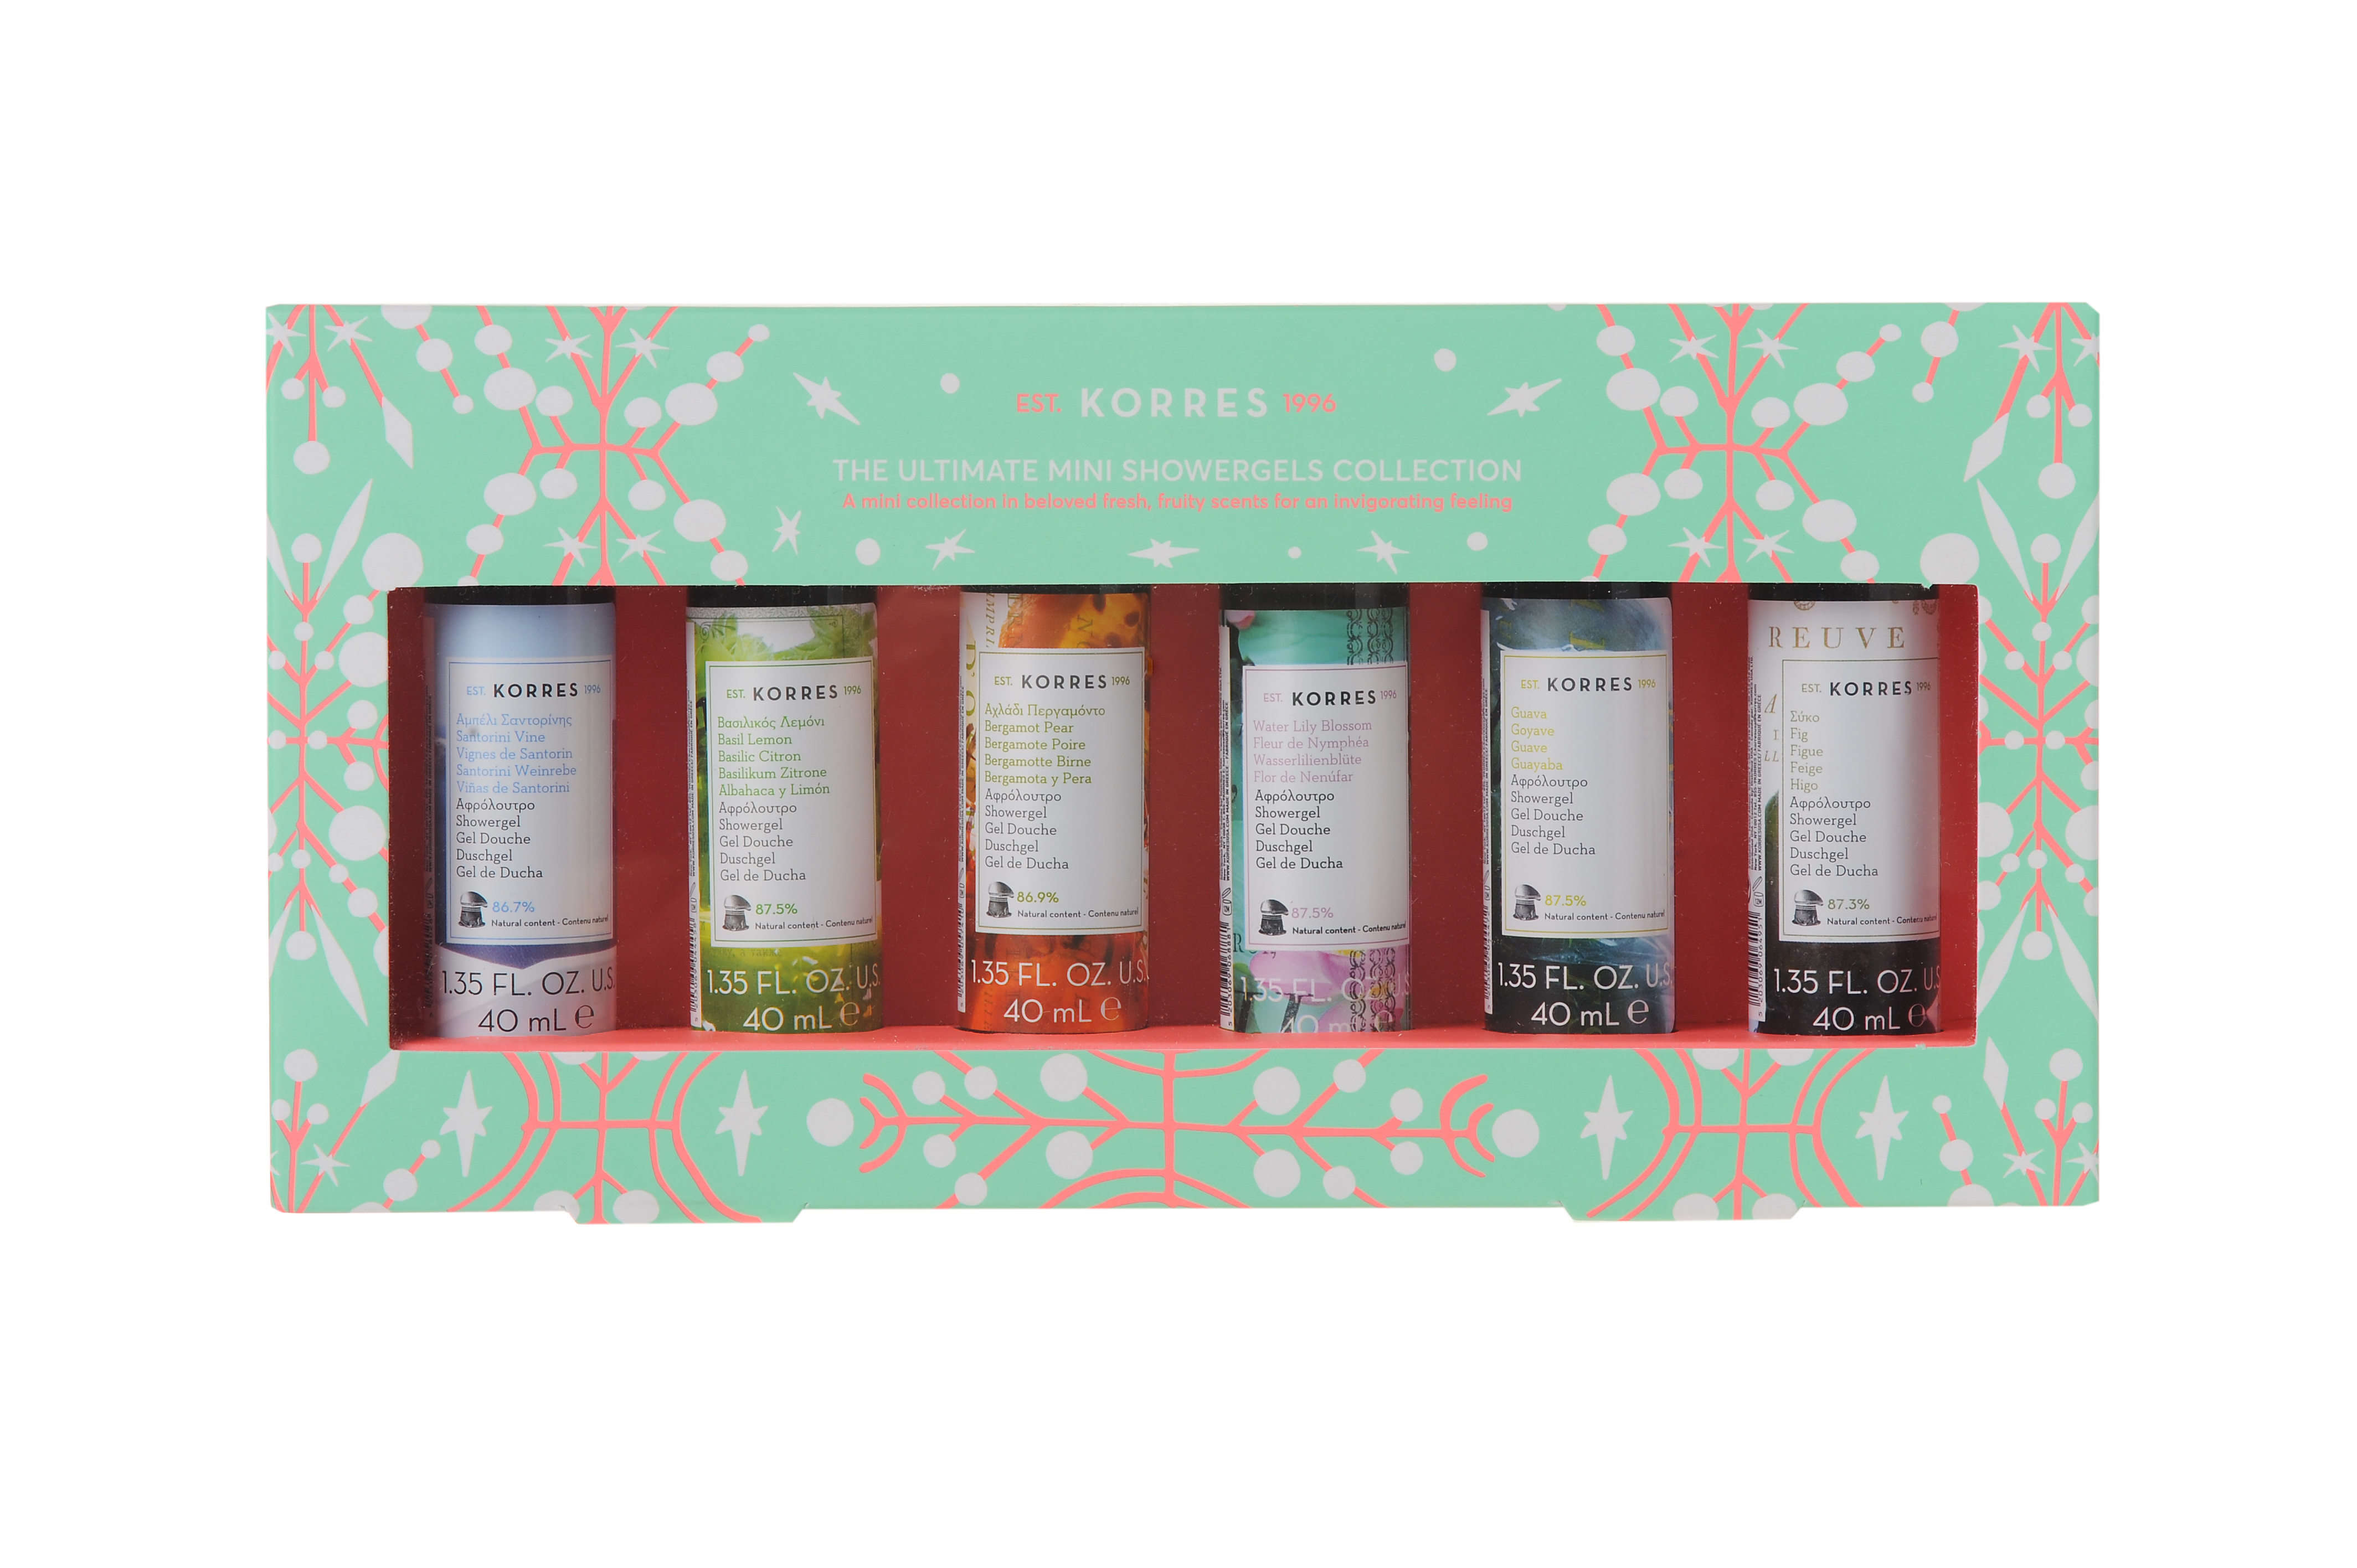 Korres The Ultimate Mini Showergels Collection